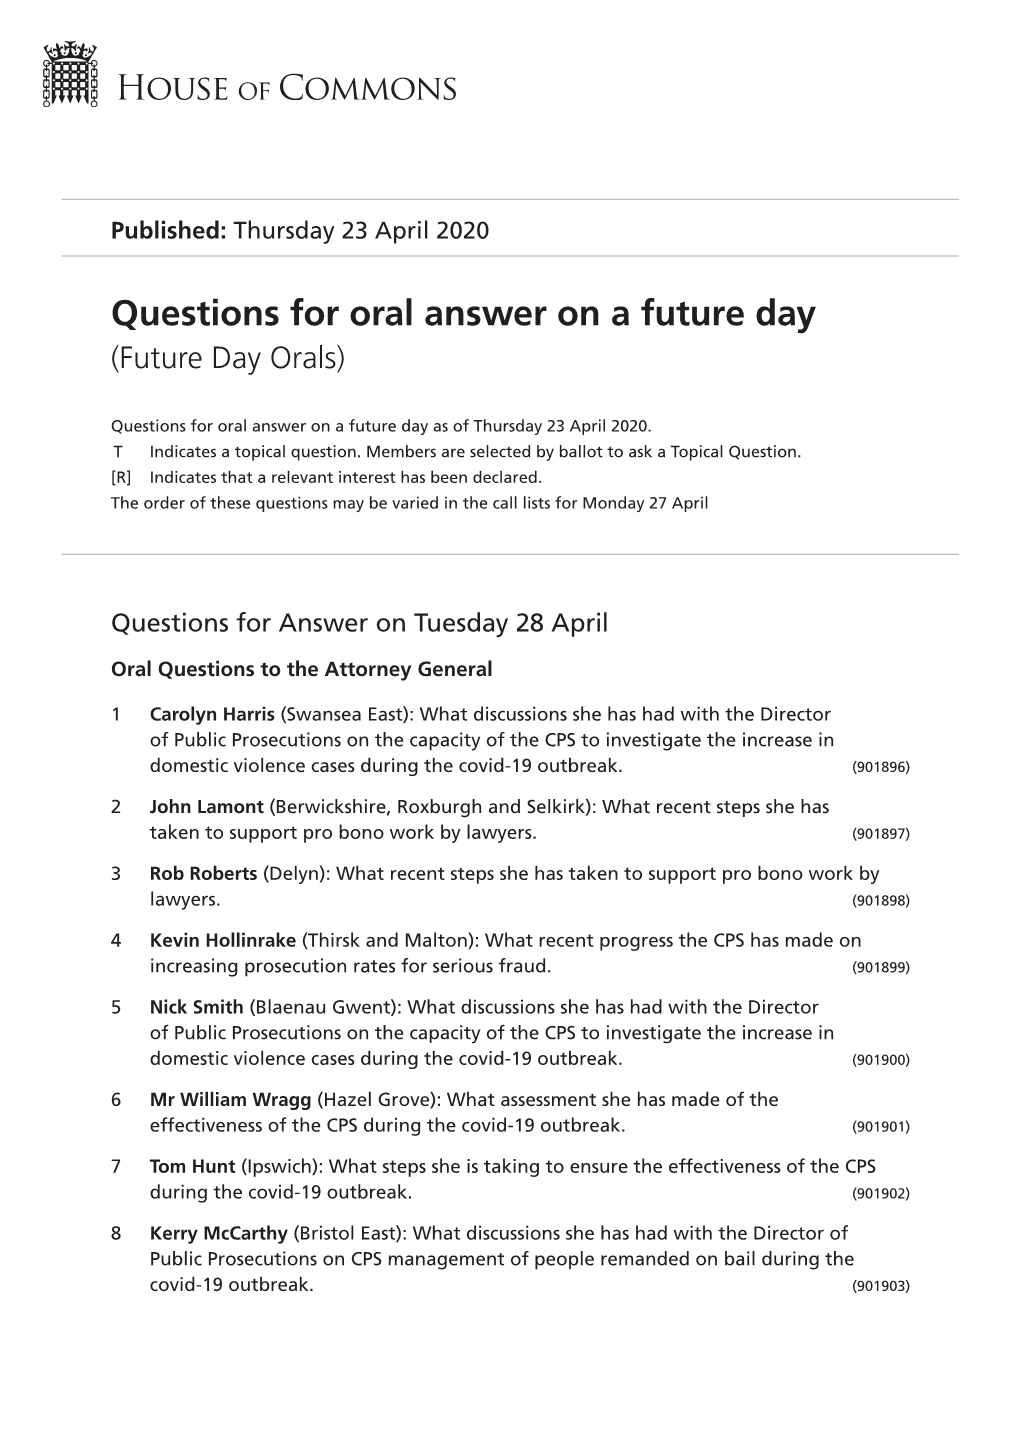 Future Oral Questions As of Thu 23 Apr 2020